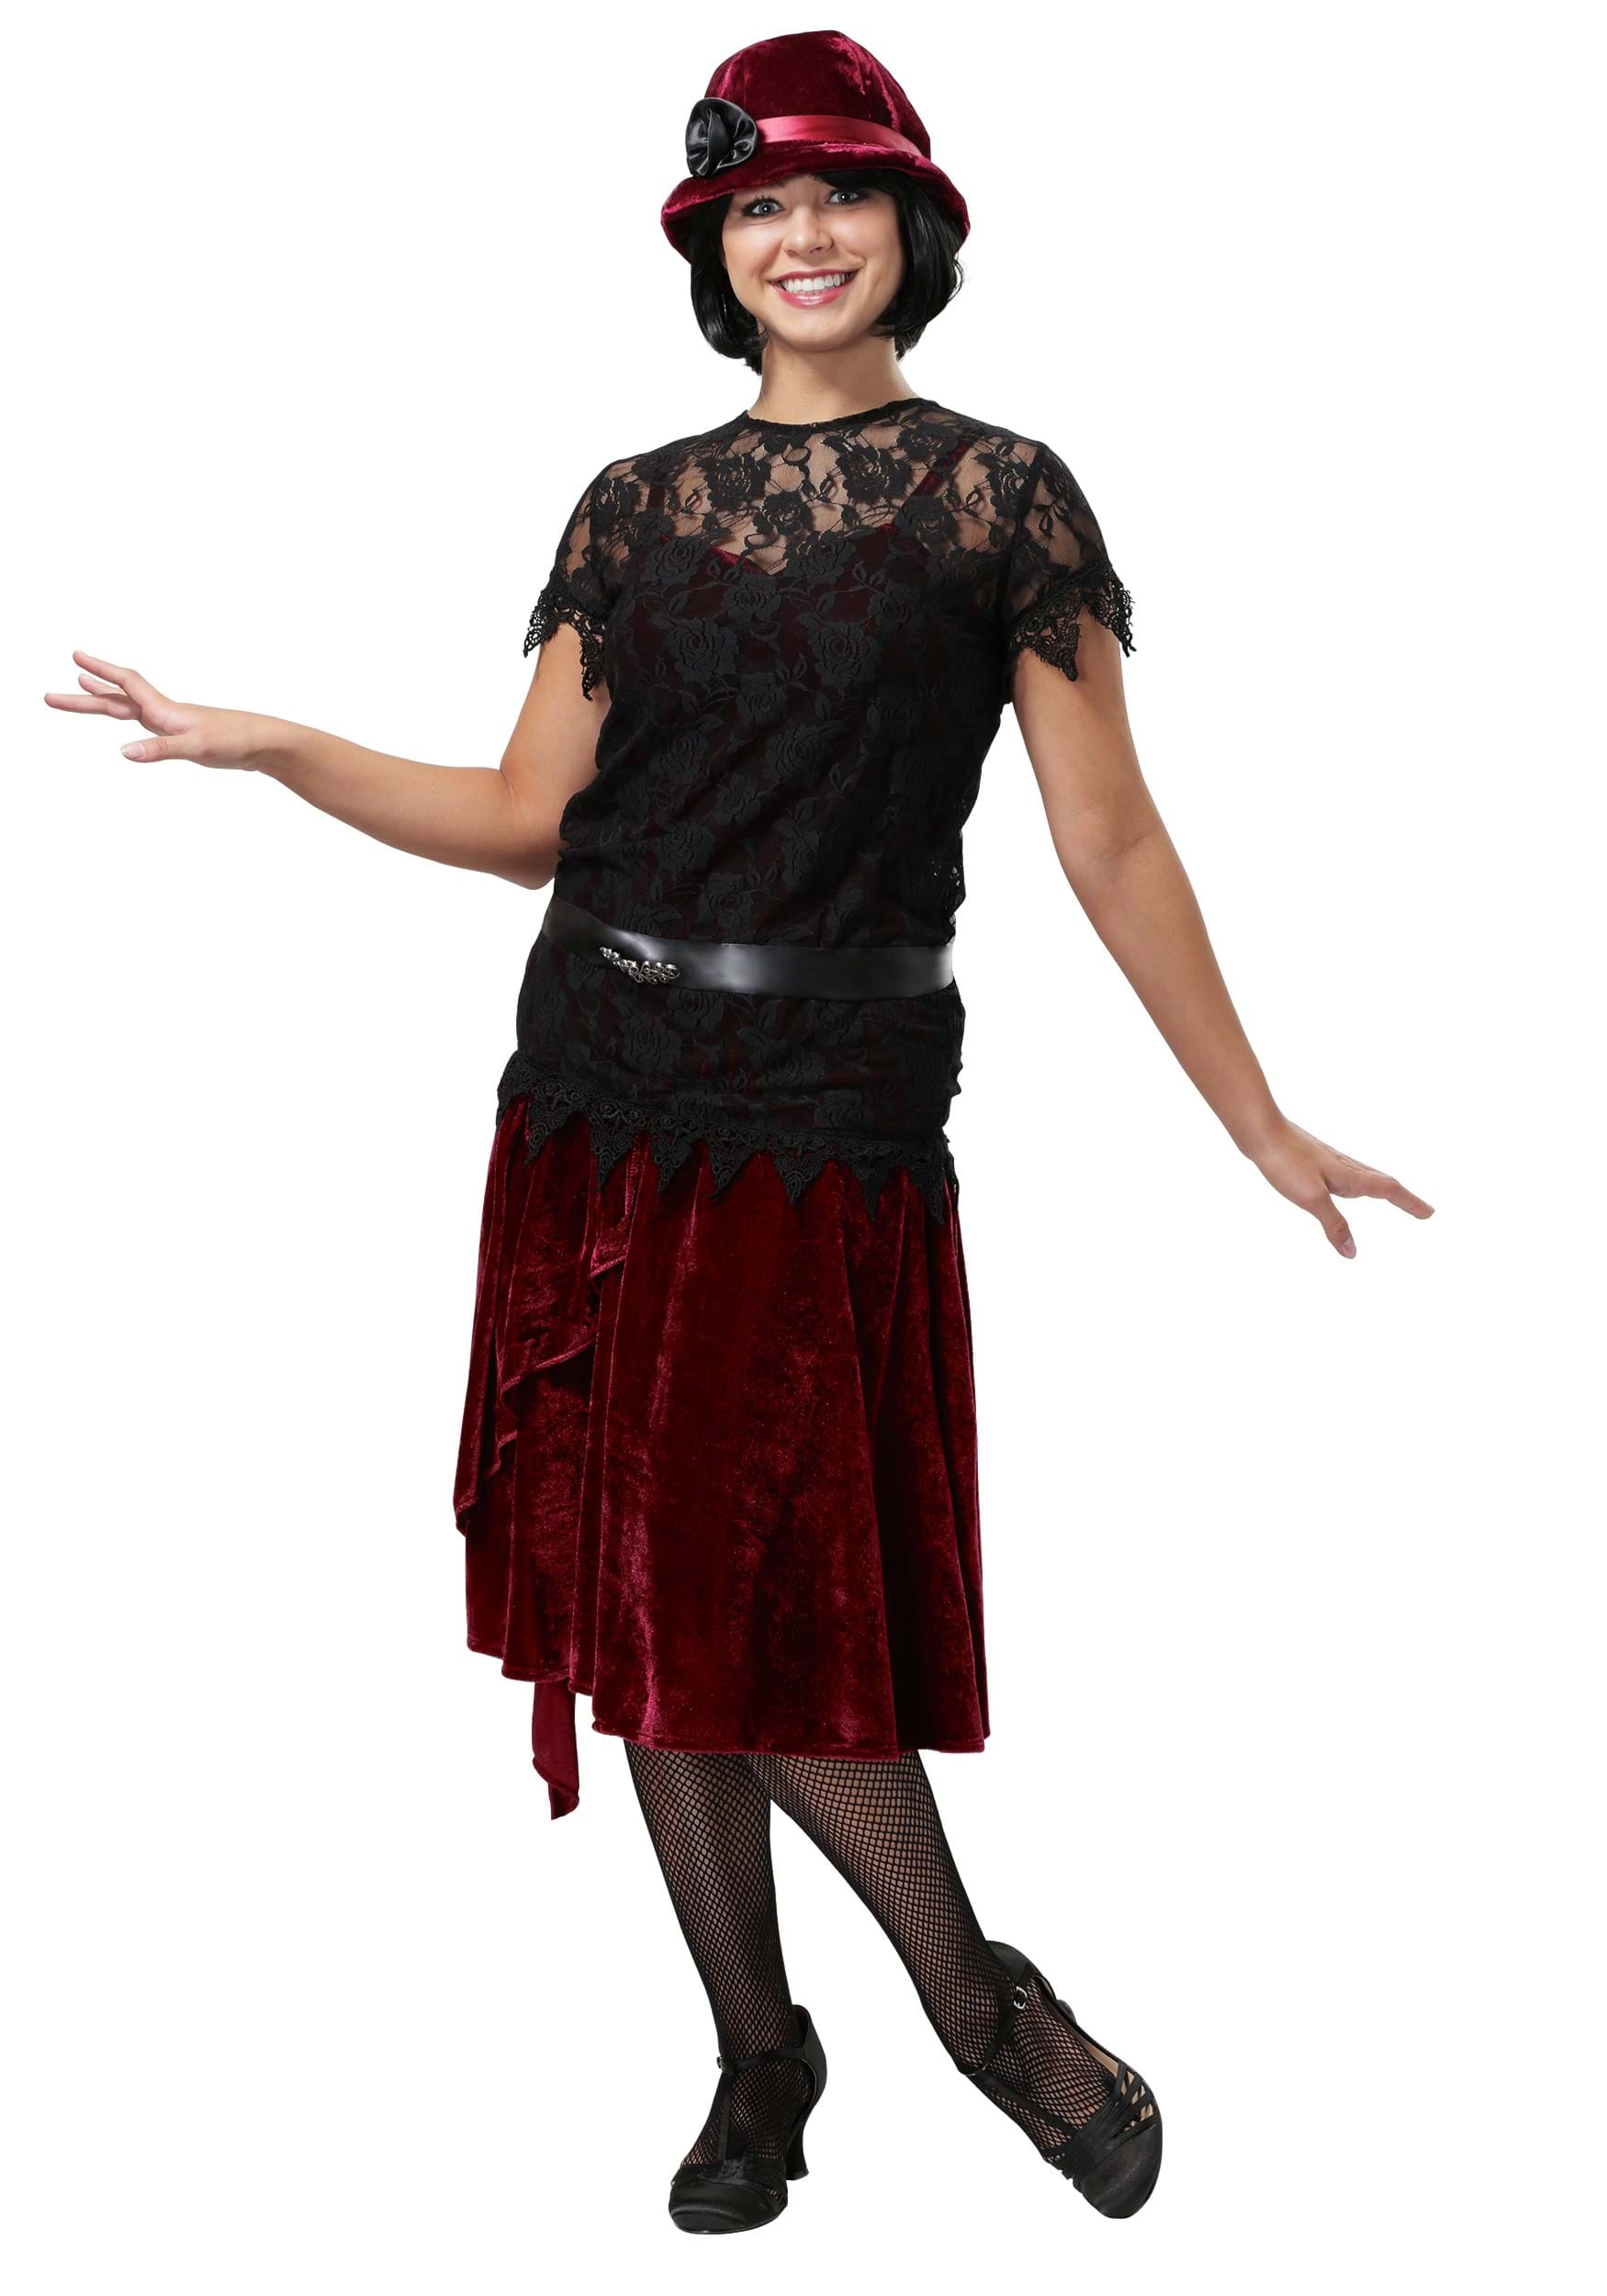 Great Gatsby Dress – Great Gatsby Dresses for Sale Plus Size Toe Tappin Flapper Costume for Women $39.99 AT vintagedancer.com